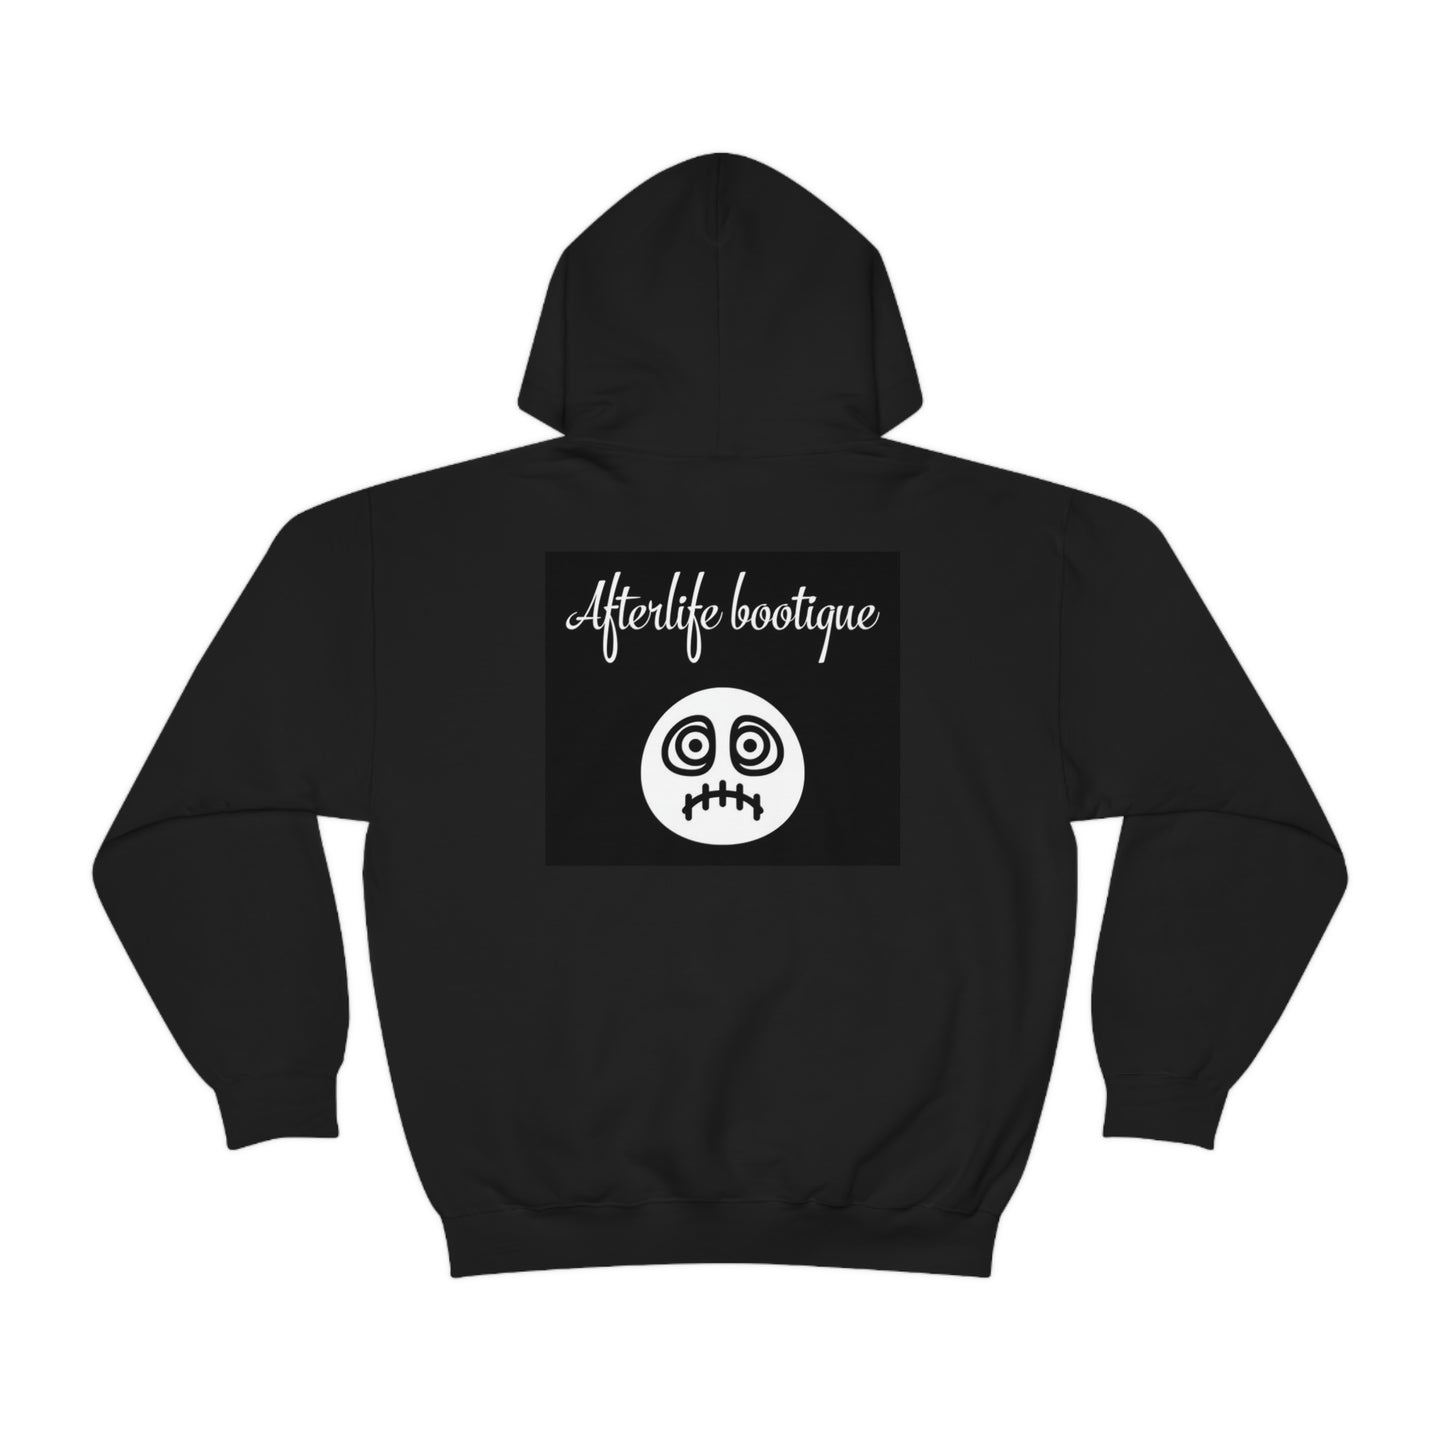 Afterlife Bootique Hoodies